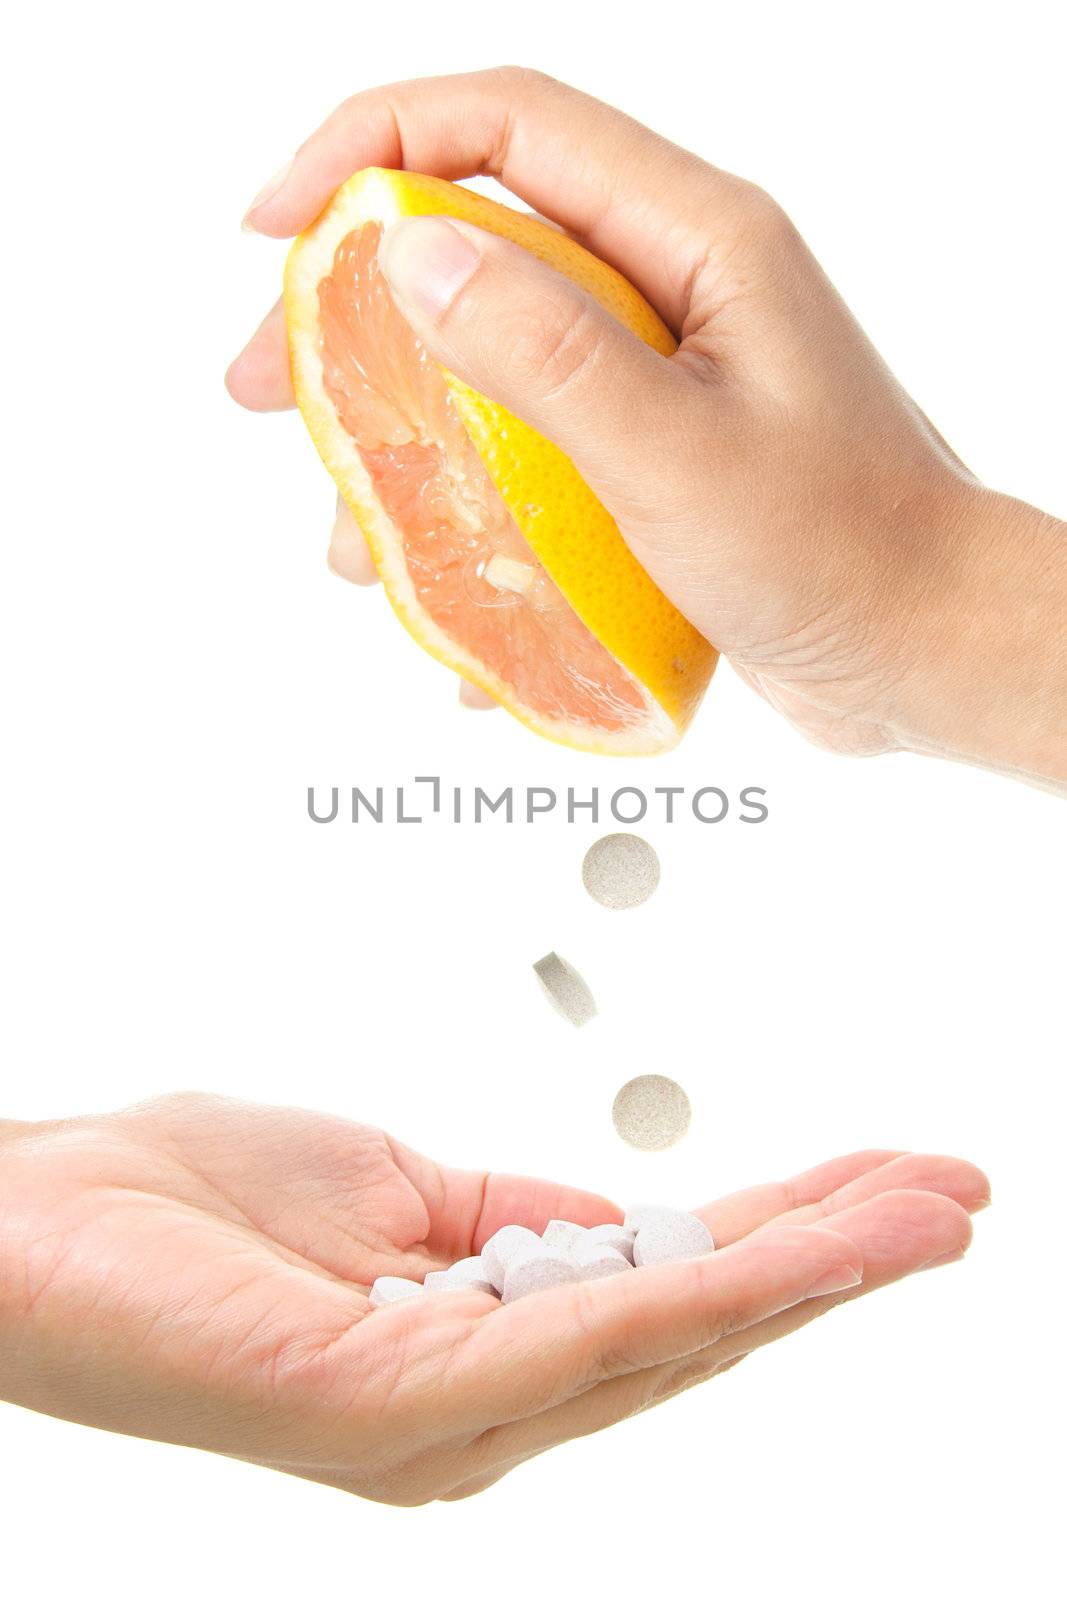 Conceptual image of vitamin tablets being squeezed out of a grapefruit